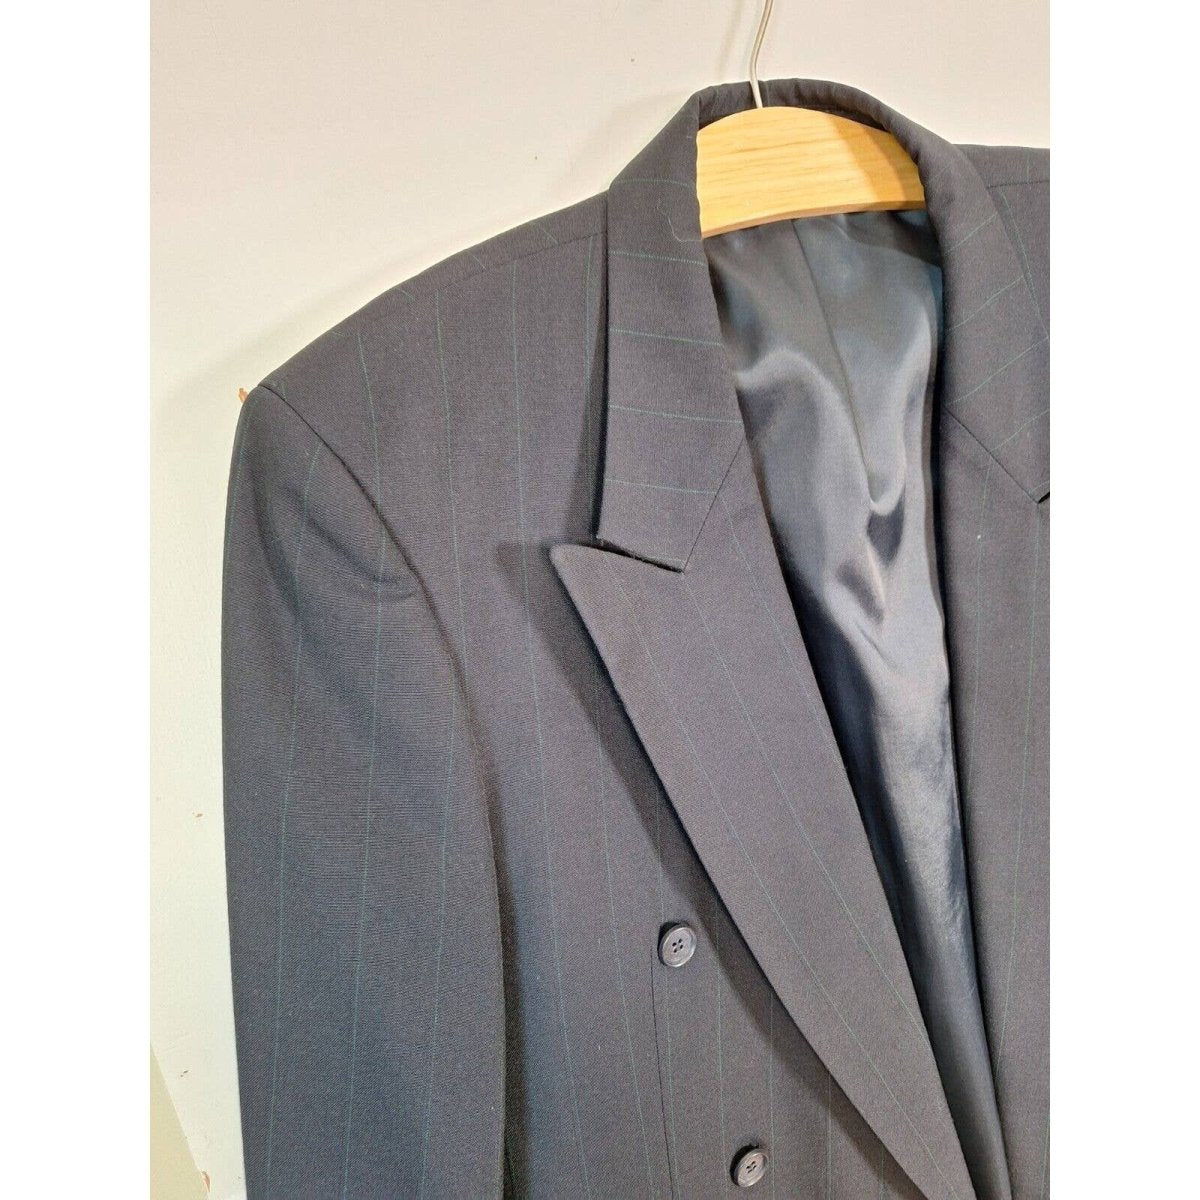 Vintage 70s/80s Navy Pinstripe Double Breasted Blazer Jacket Men's SIze M/L 40/42 - themallvintage The Mall Vintage